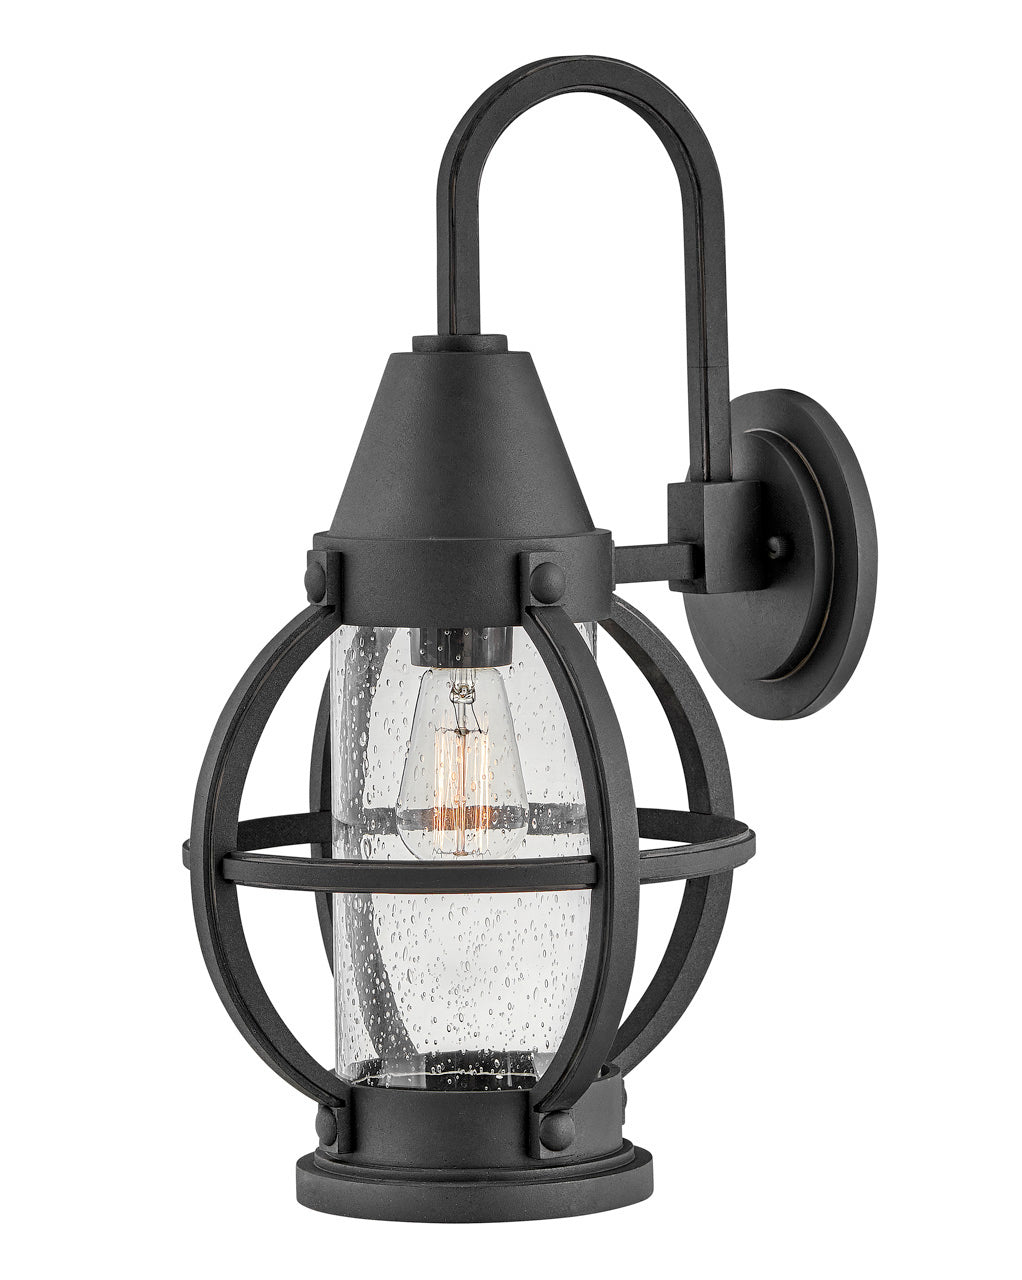 OUTDOOR CHATHAM Wall Mount Lantern Outdoor l Wall Hinkley Museum Black 12.0x10.5x20.0 